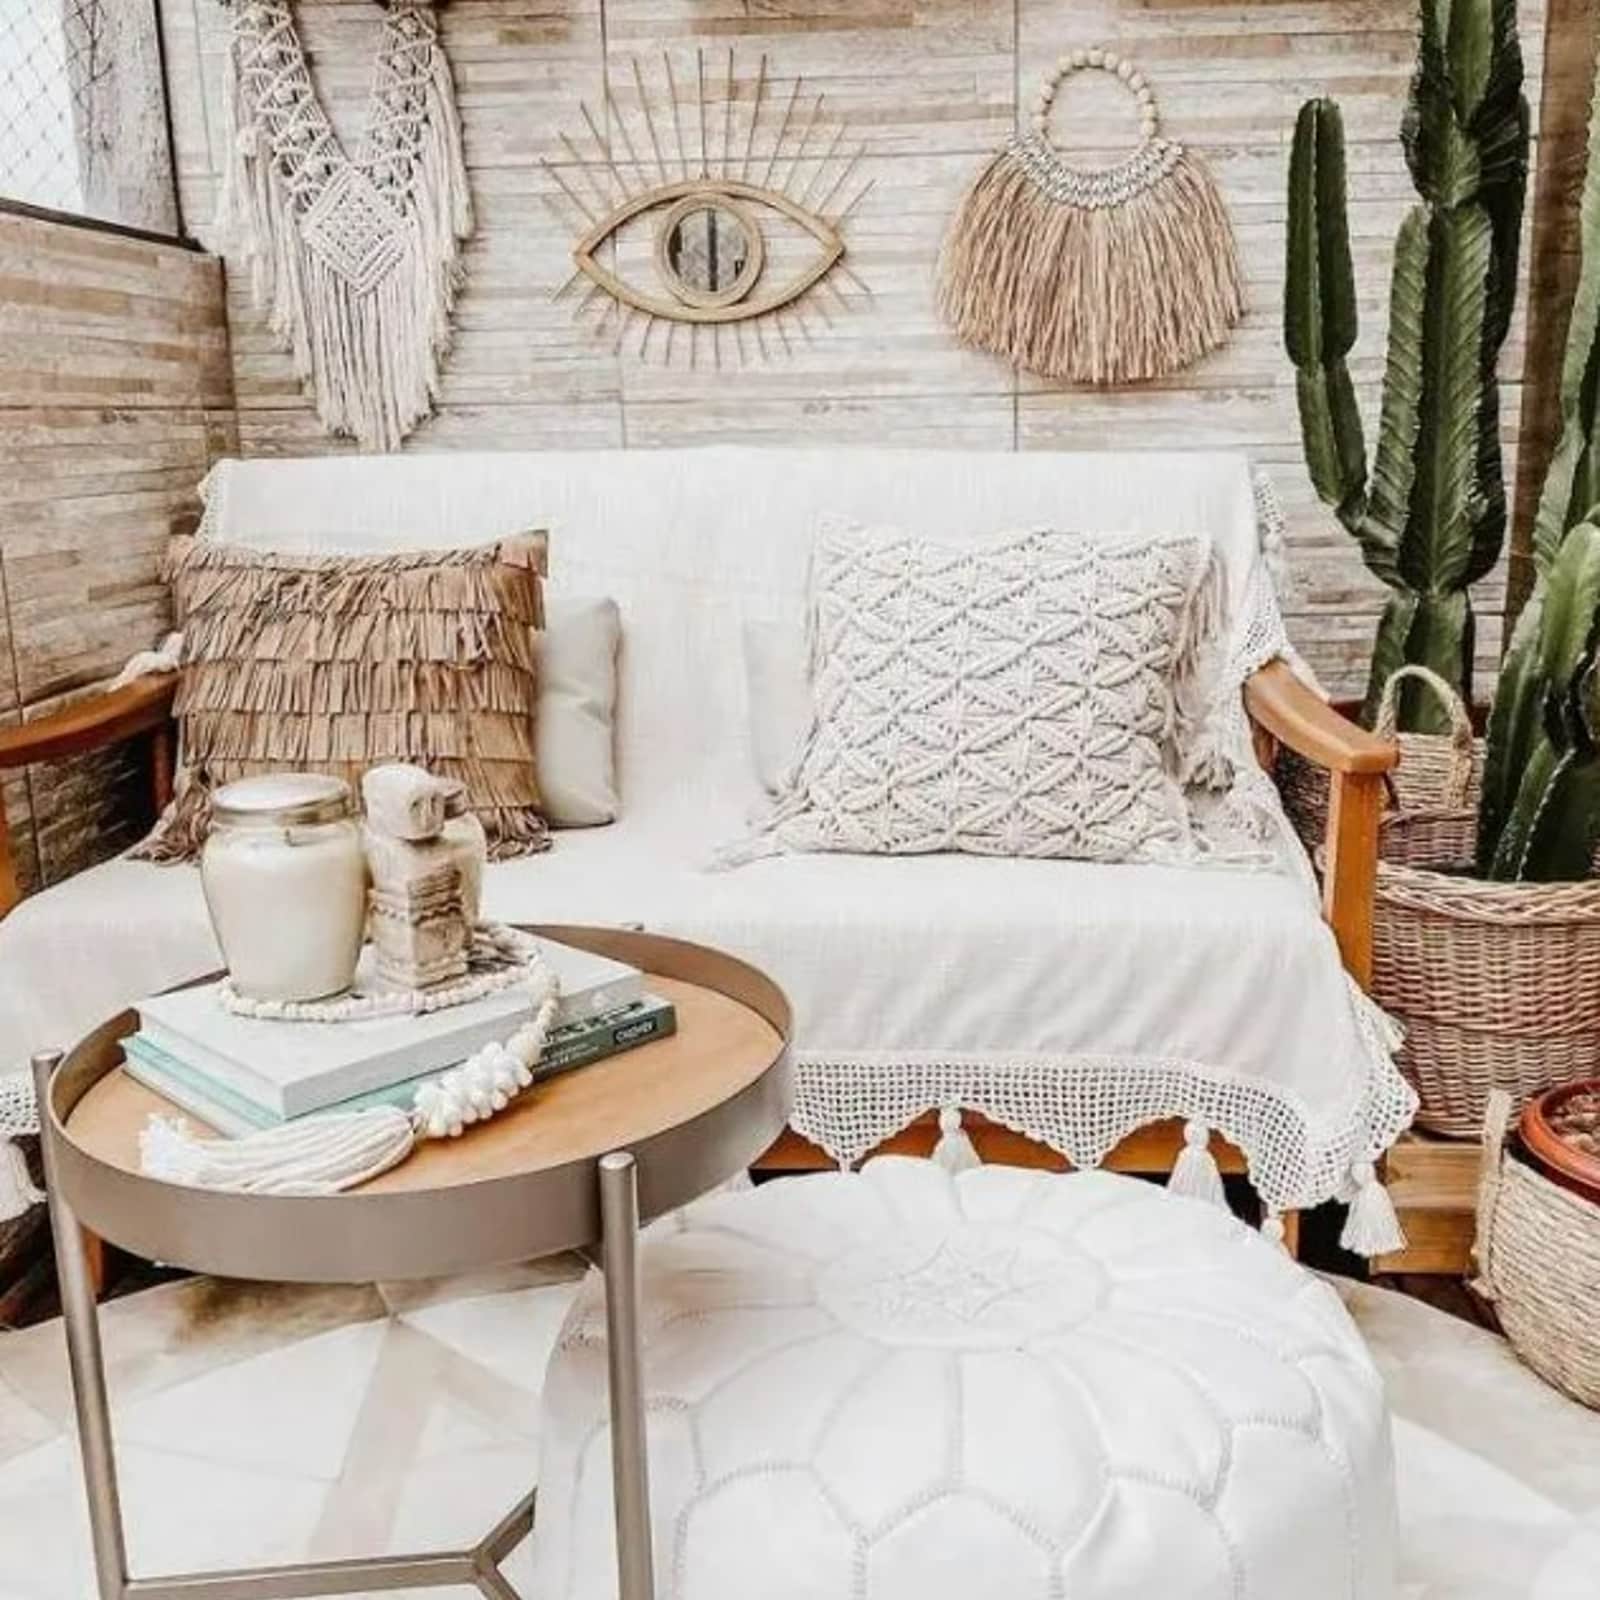 Pillows and rugs